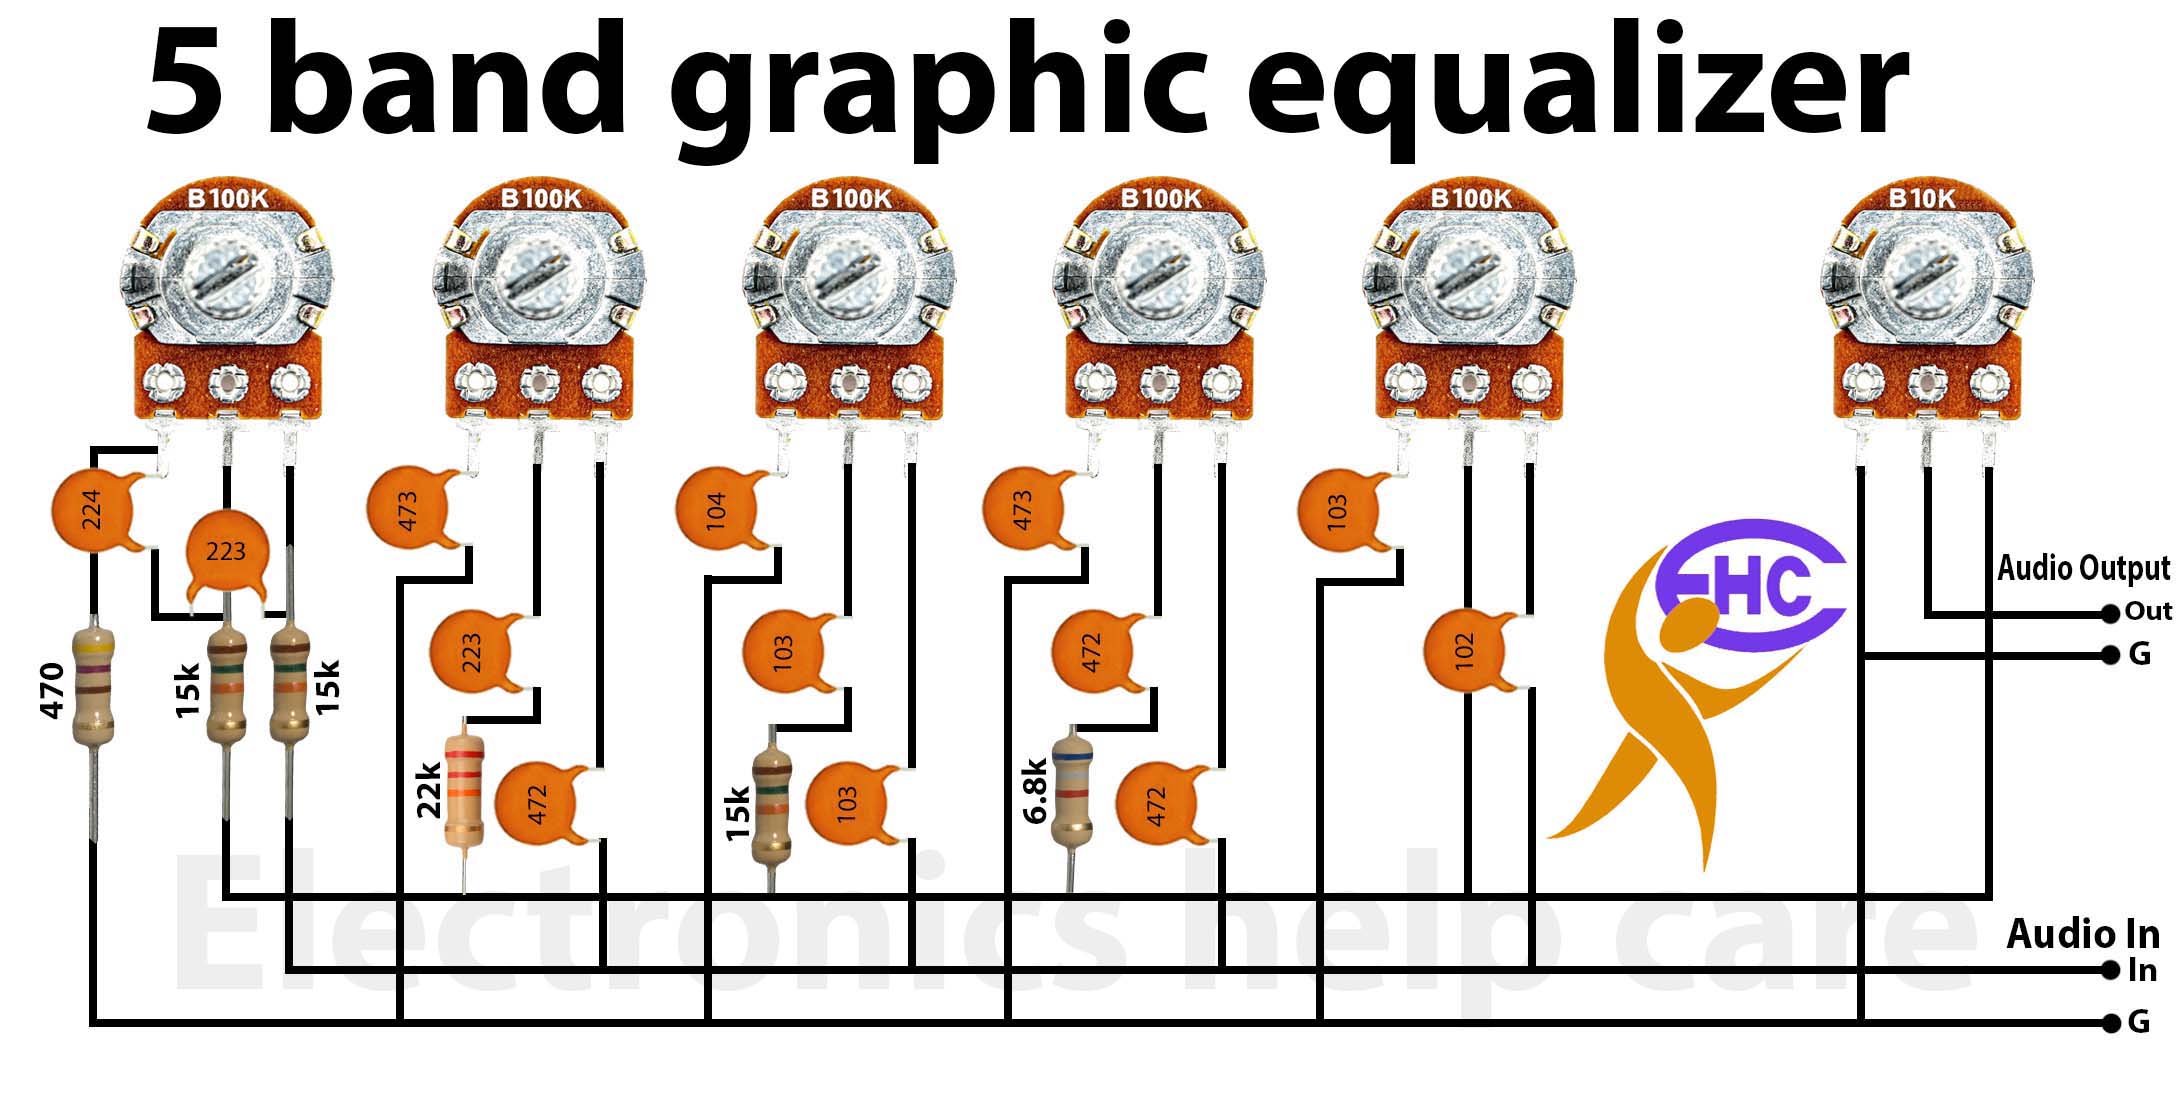 5 band graphic equalizer